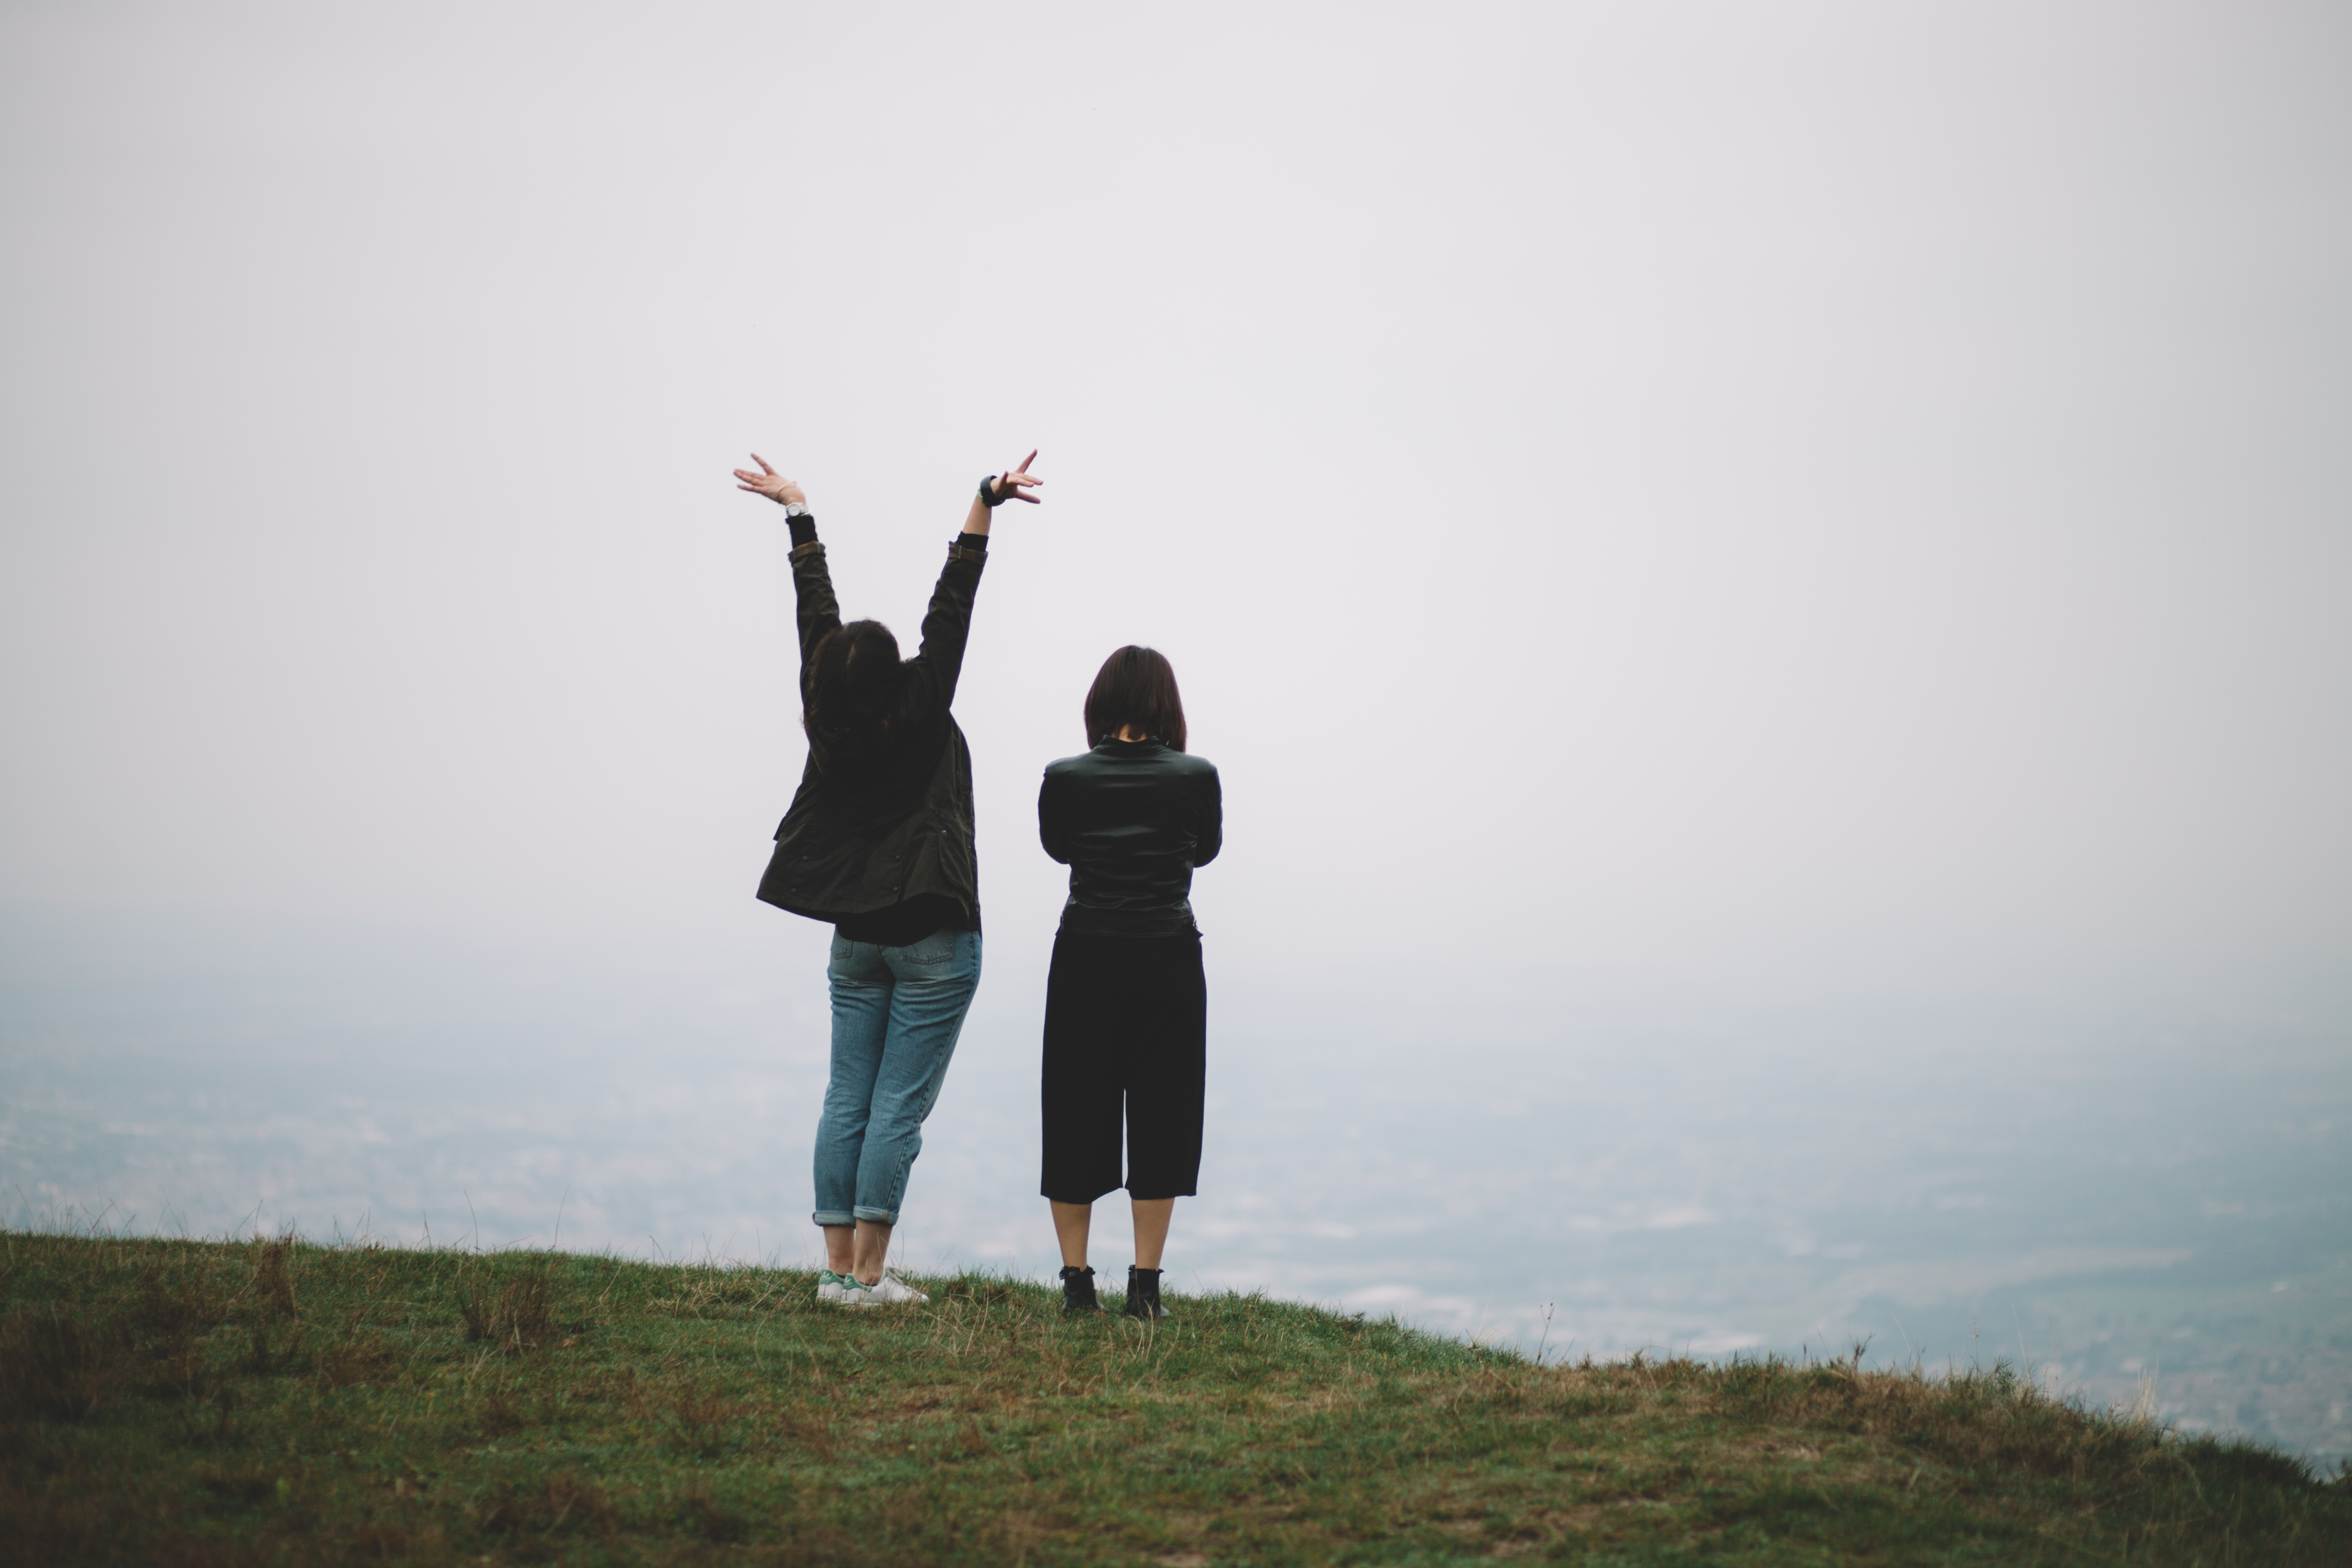 hiking vacation two women on a cliff edge looking out to see. one with folded arms and the other with arms in the air. dressed warmly in jeans and thick cardigans. grey sky, green grass foggy pale blue sea